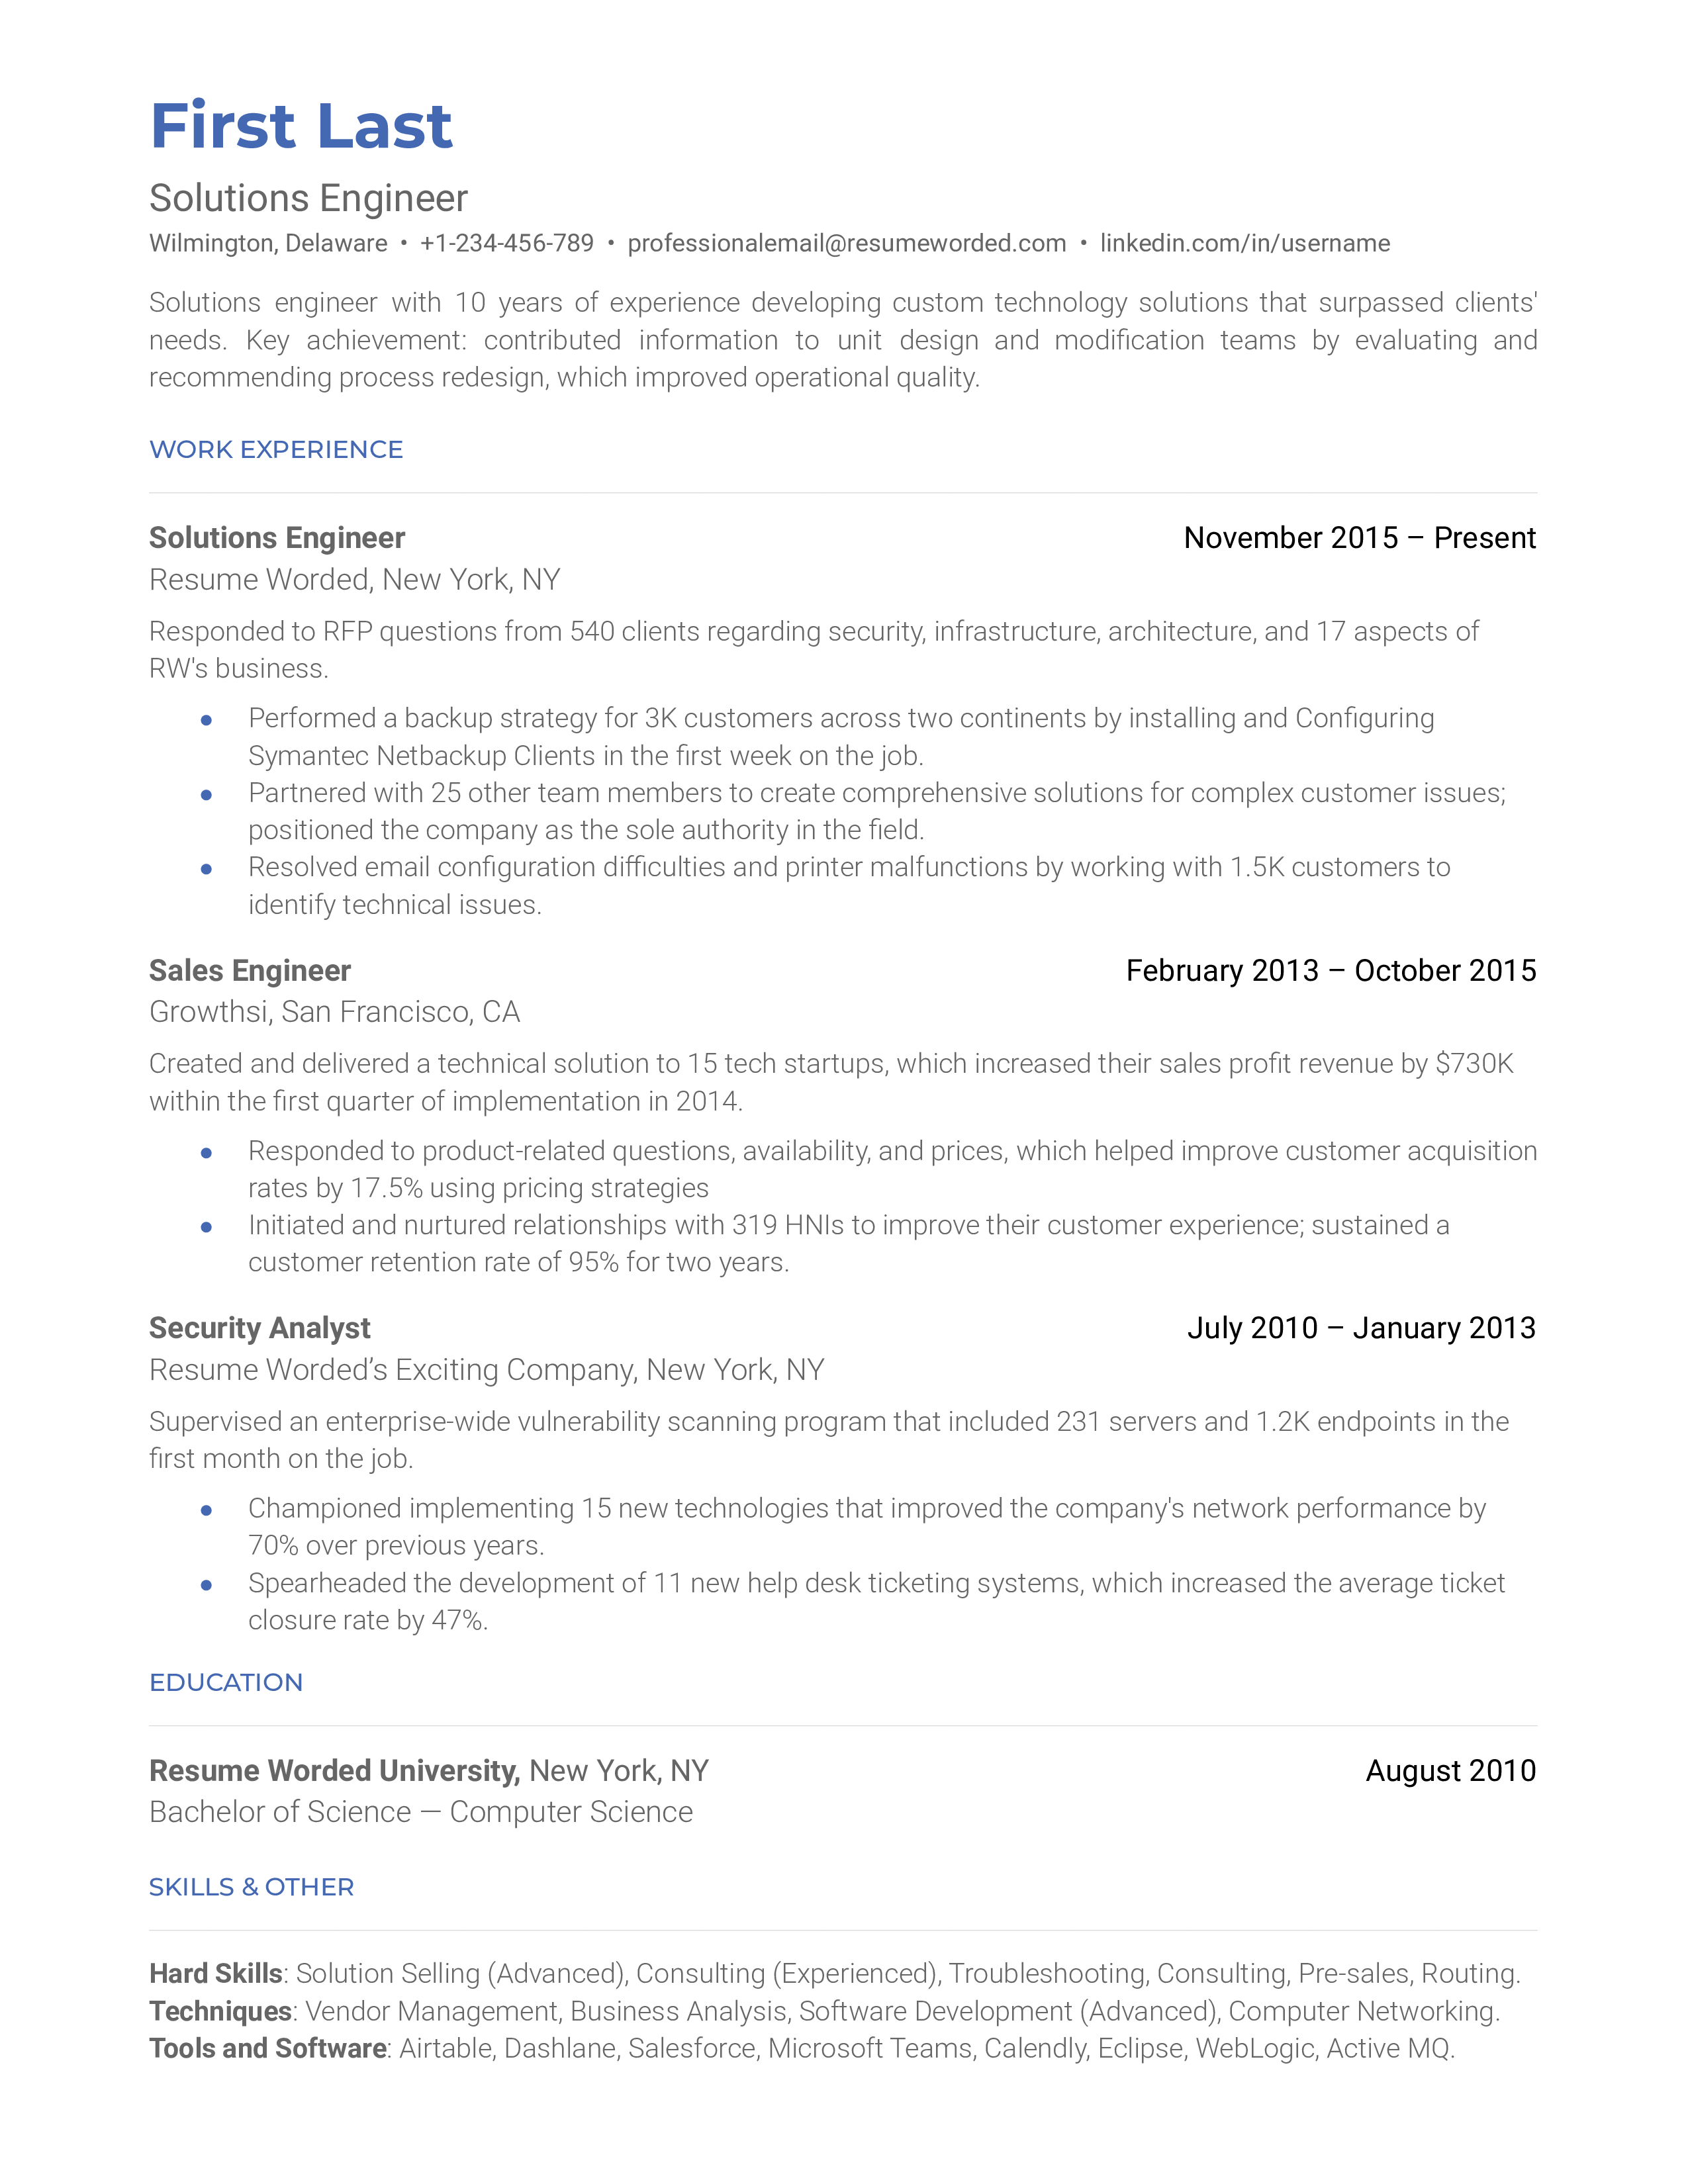 A solutions engineer resume template that uses strong action verbs